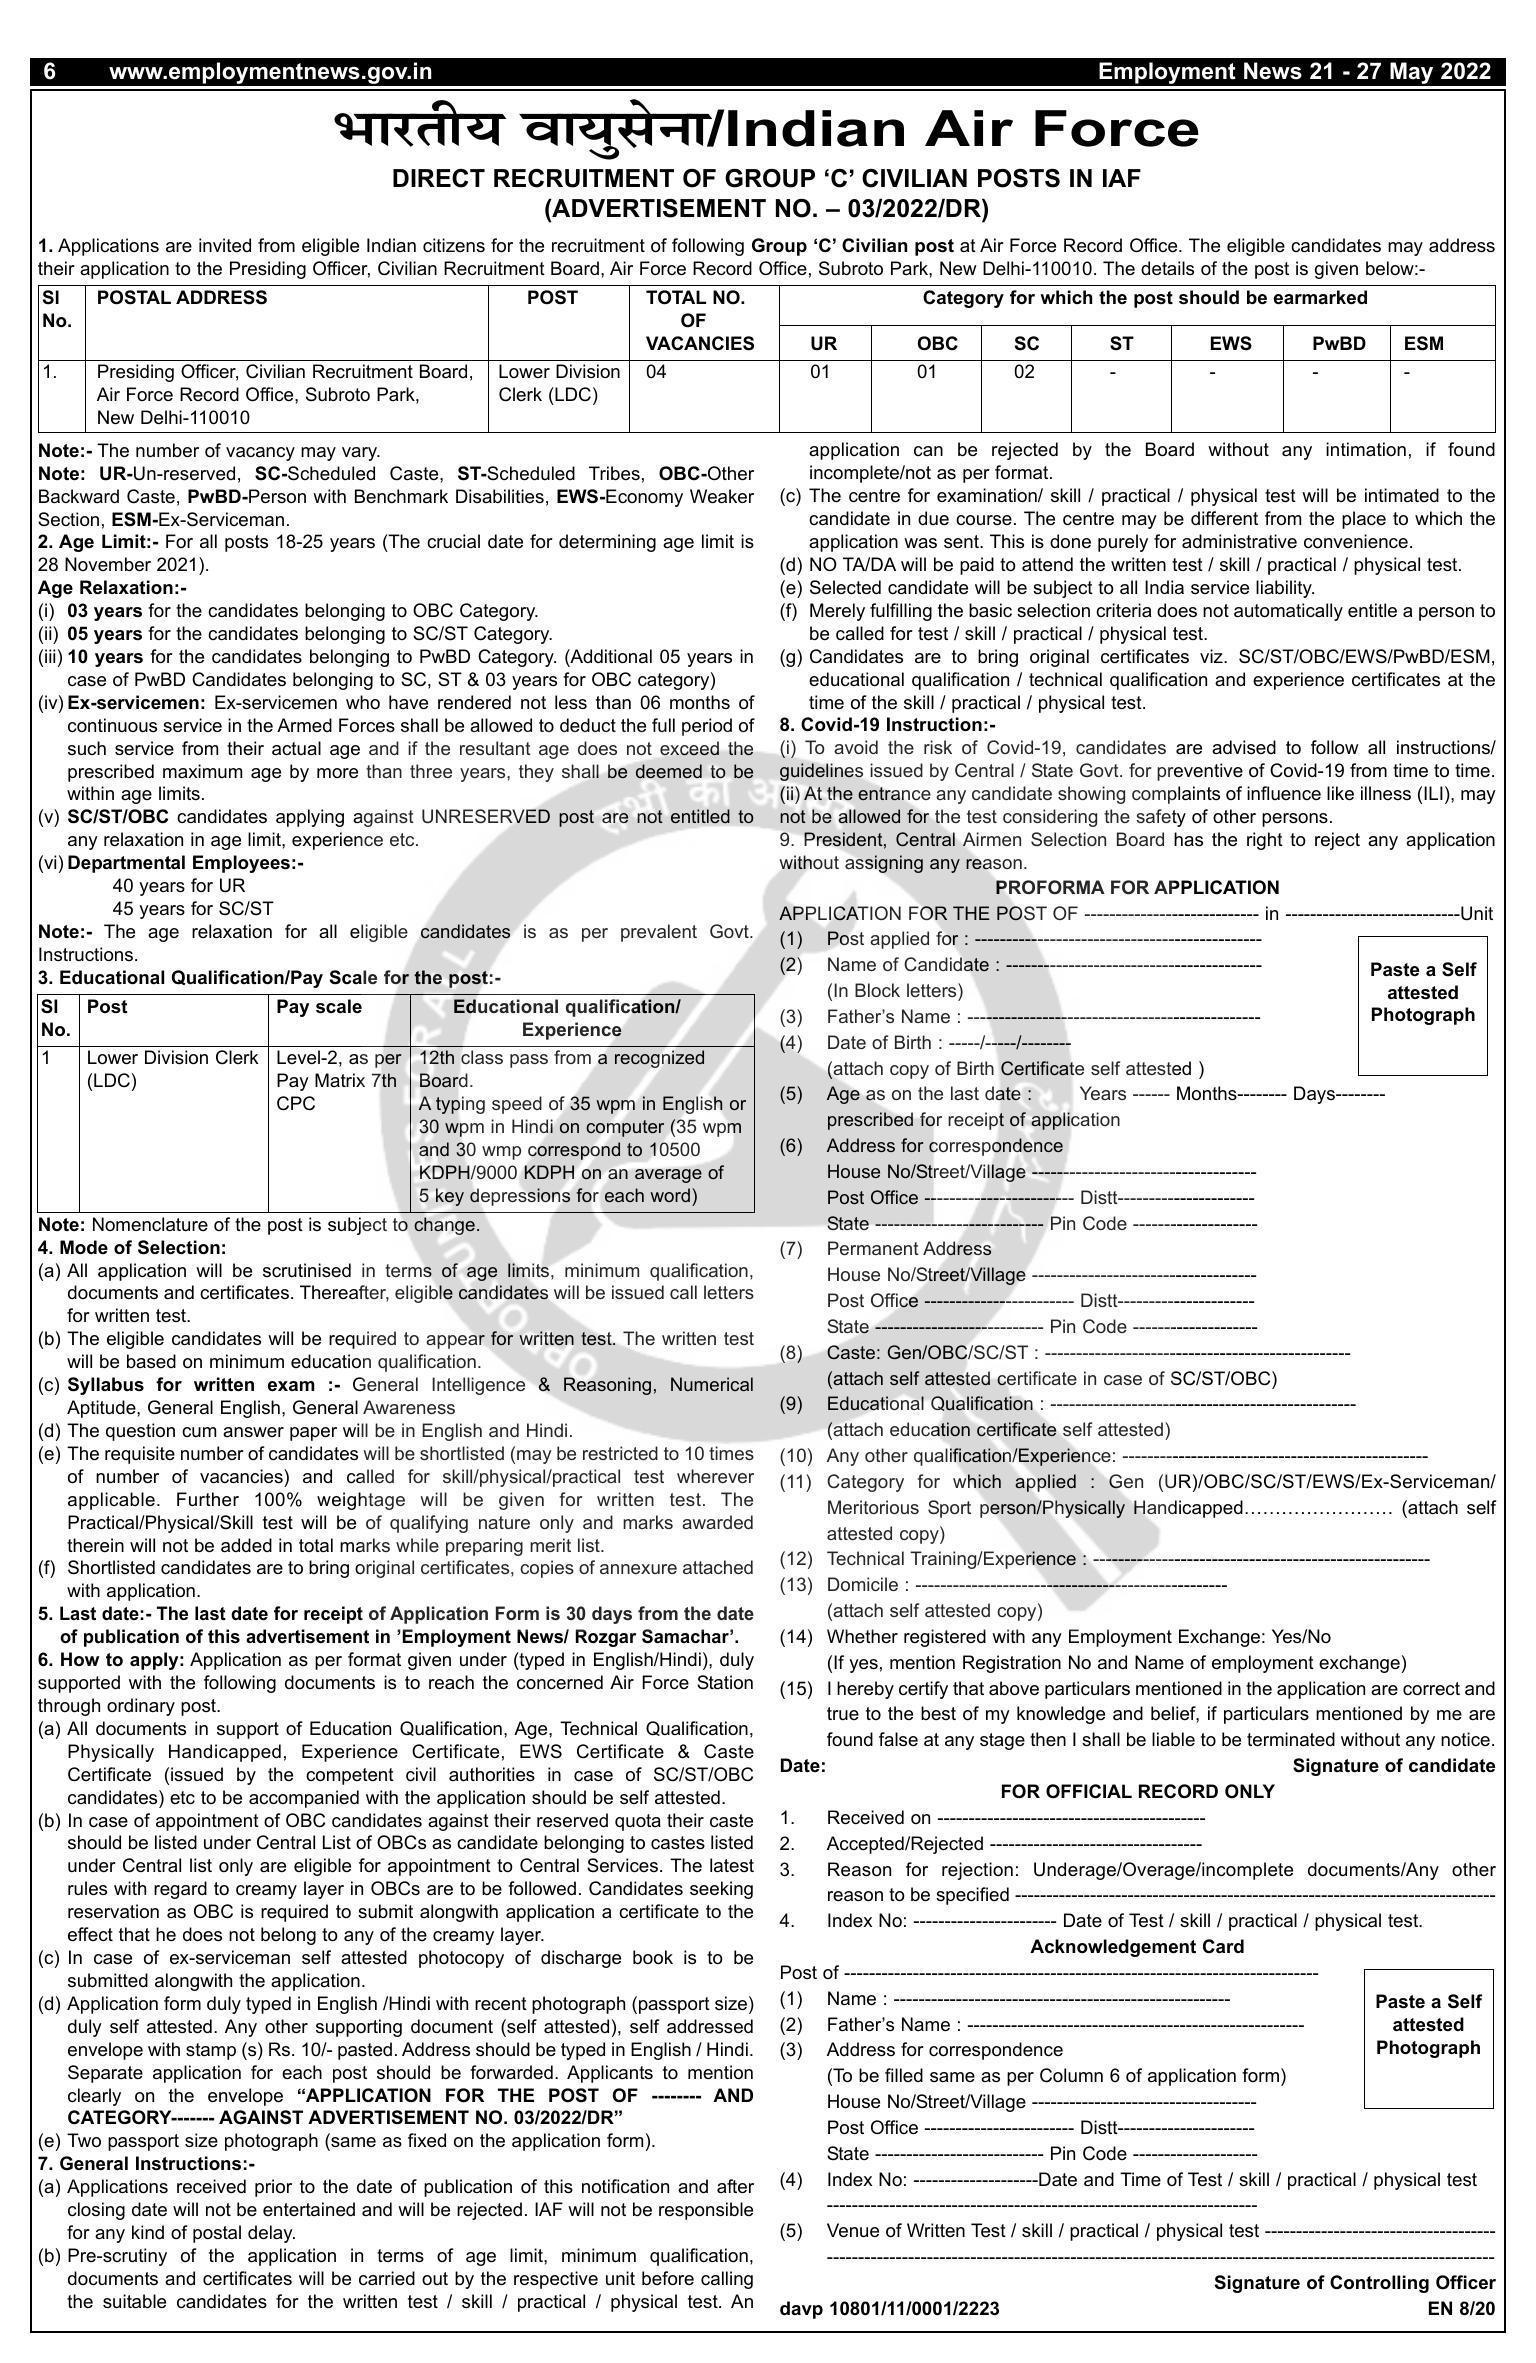 Indian Air Force (IAF) Lower Division Clerk (LDC) Recruitment 2022 - Page 1